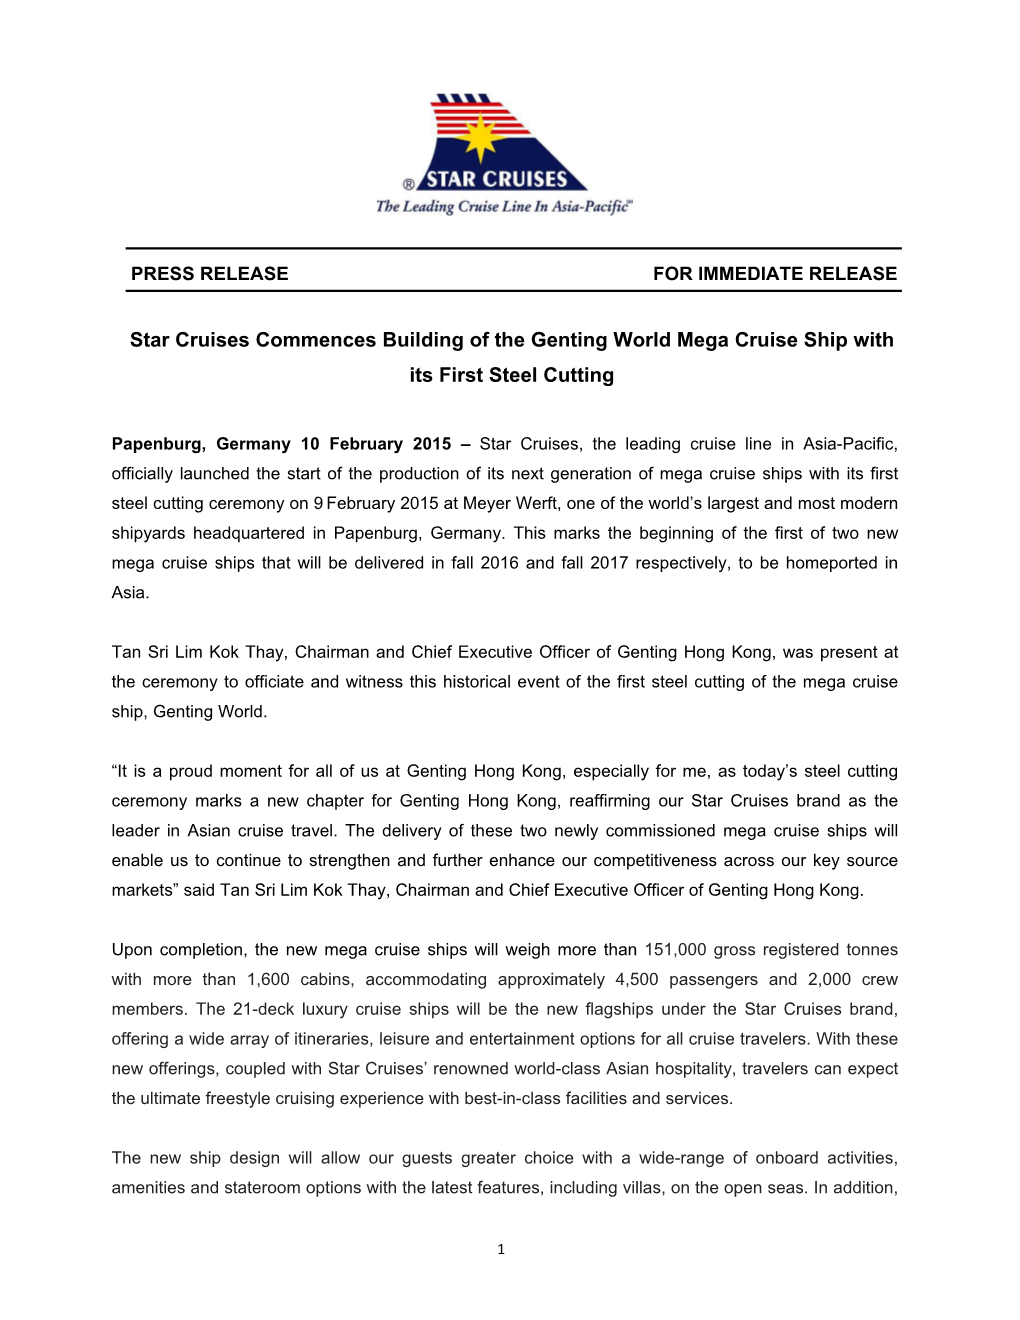 Star Cruises Commences Building of the Genting World Mega Cruise Ship with Its First Steel Cutting